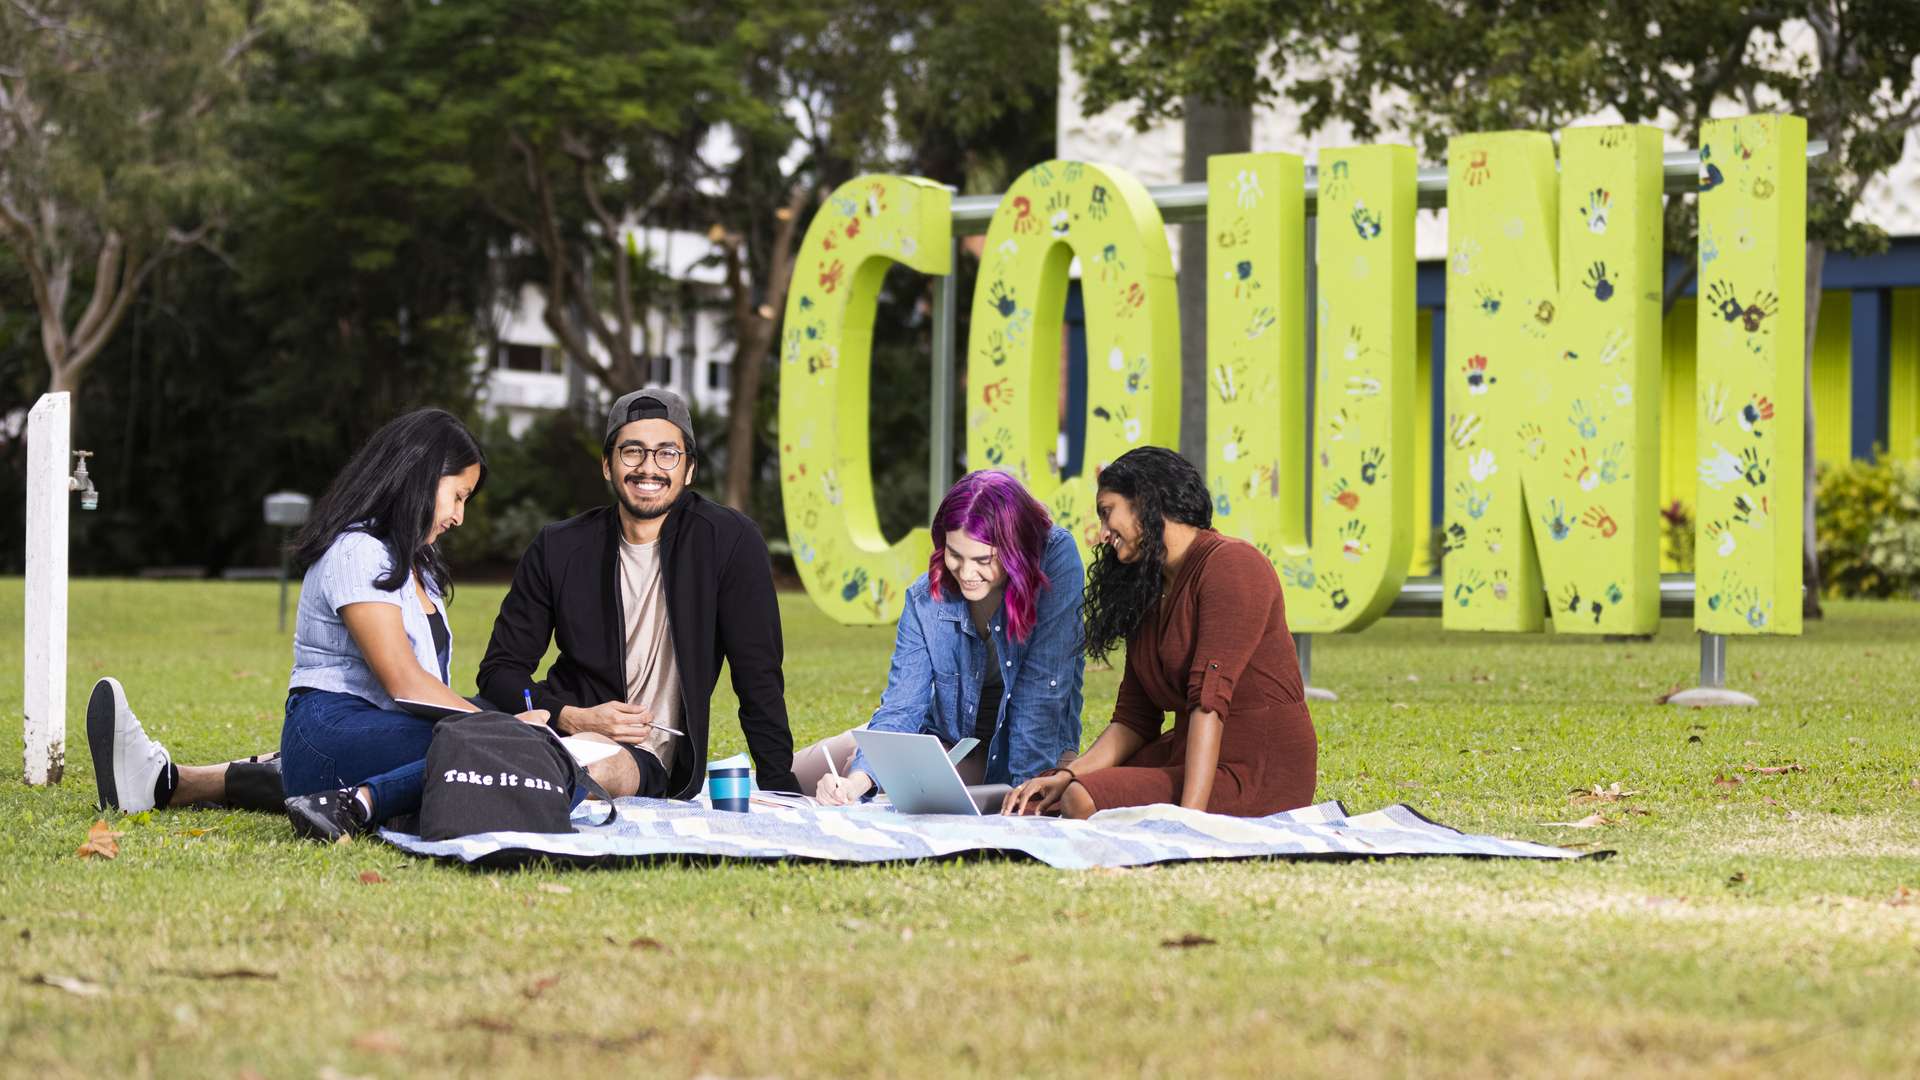 CQU students sitting on a blanket, on campus